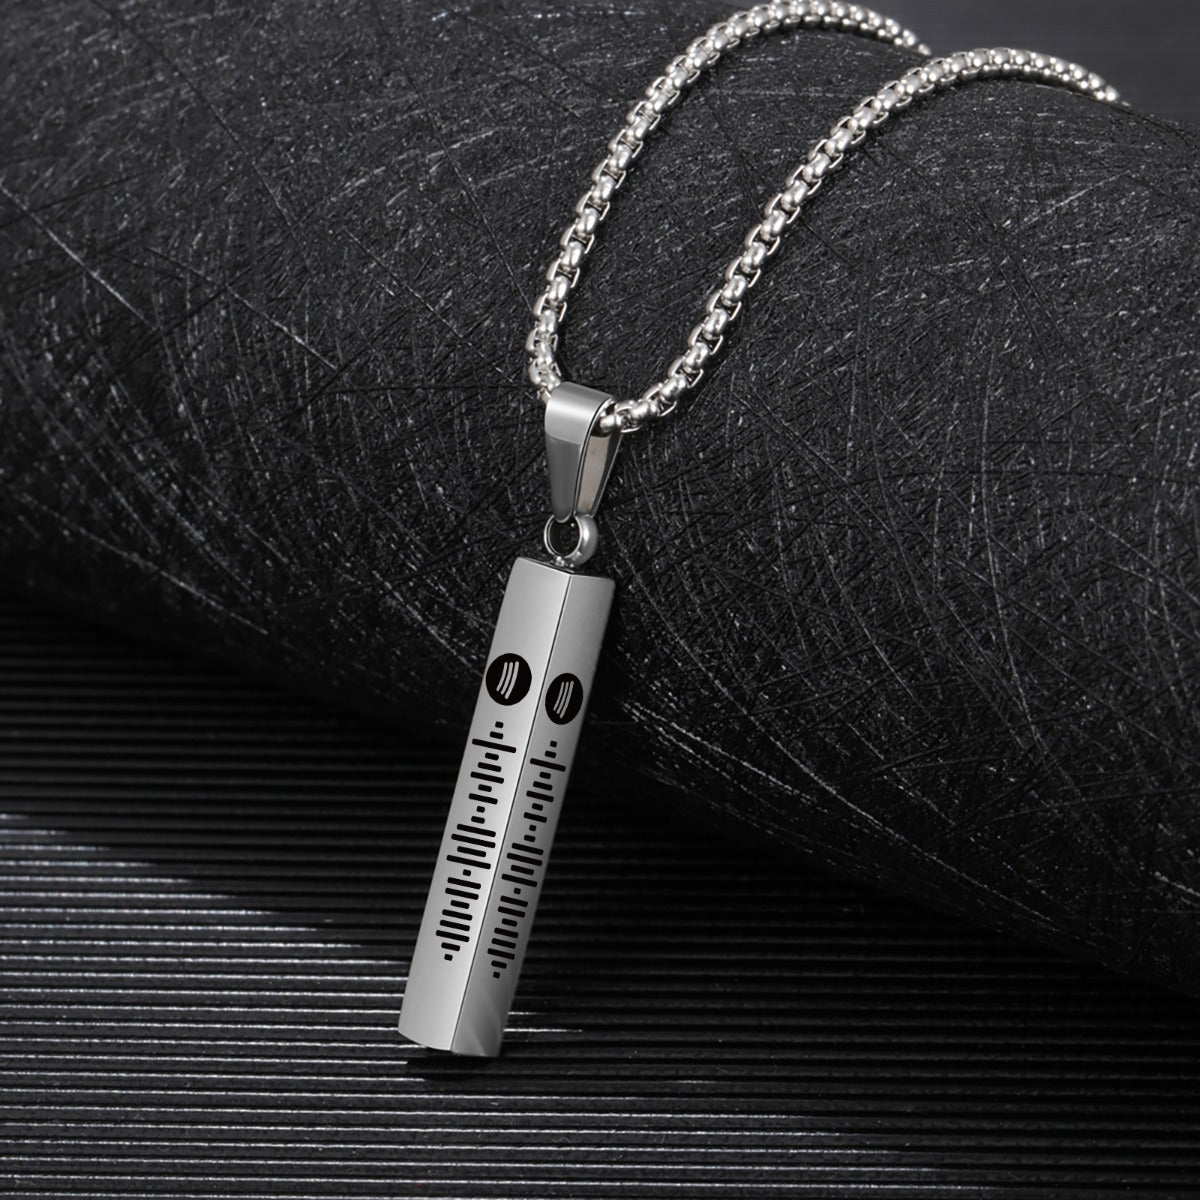 Personalized Stainless Steel Bar Necklace